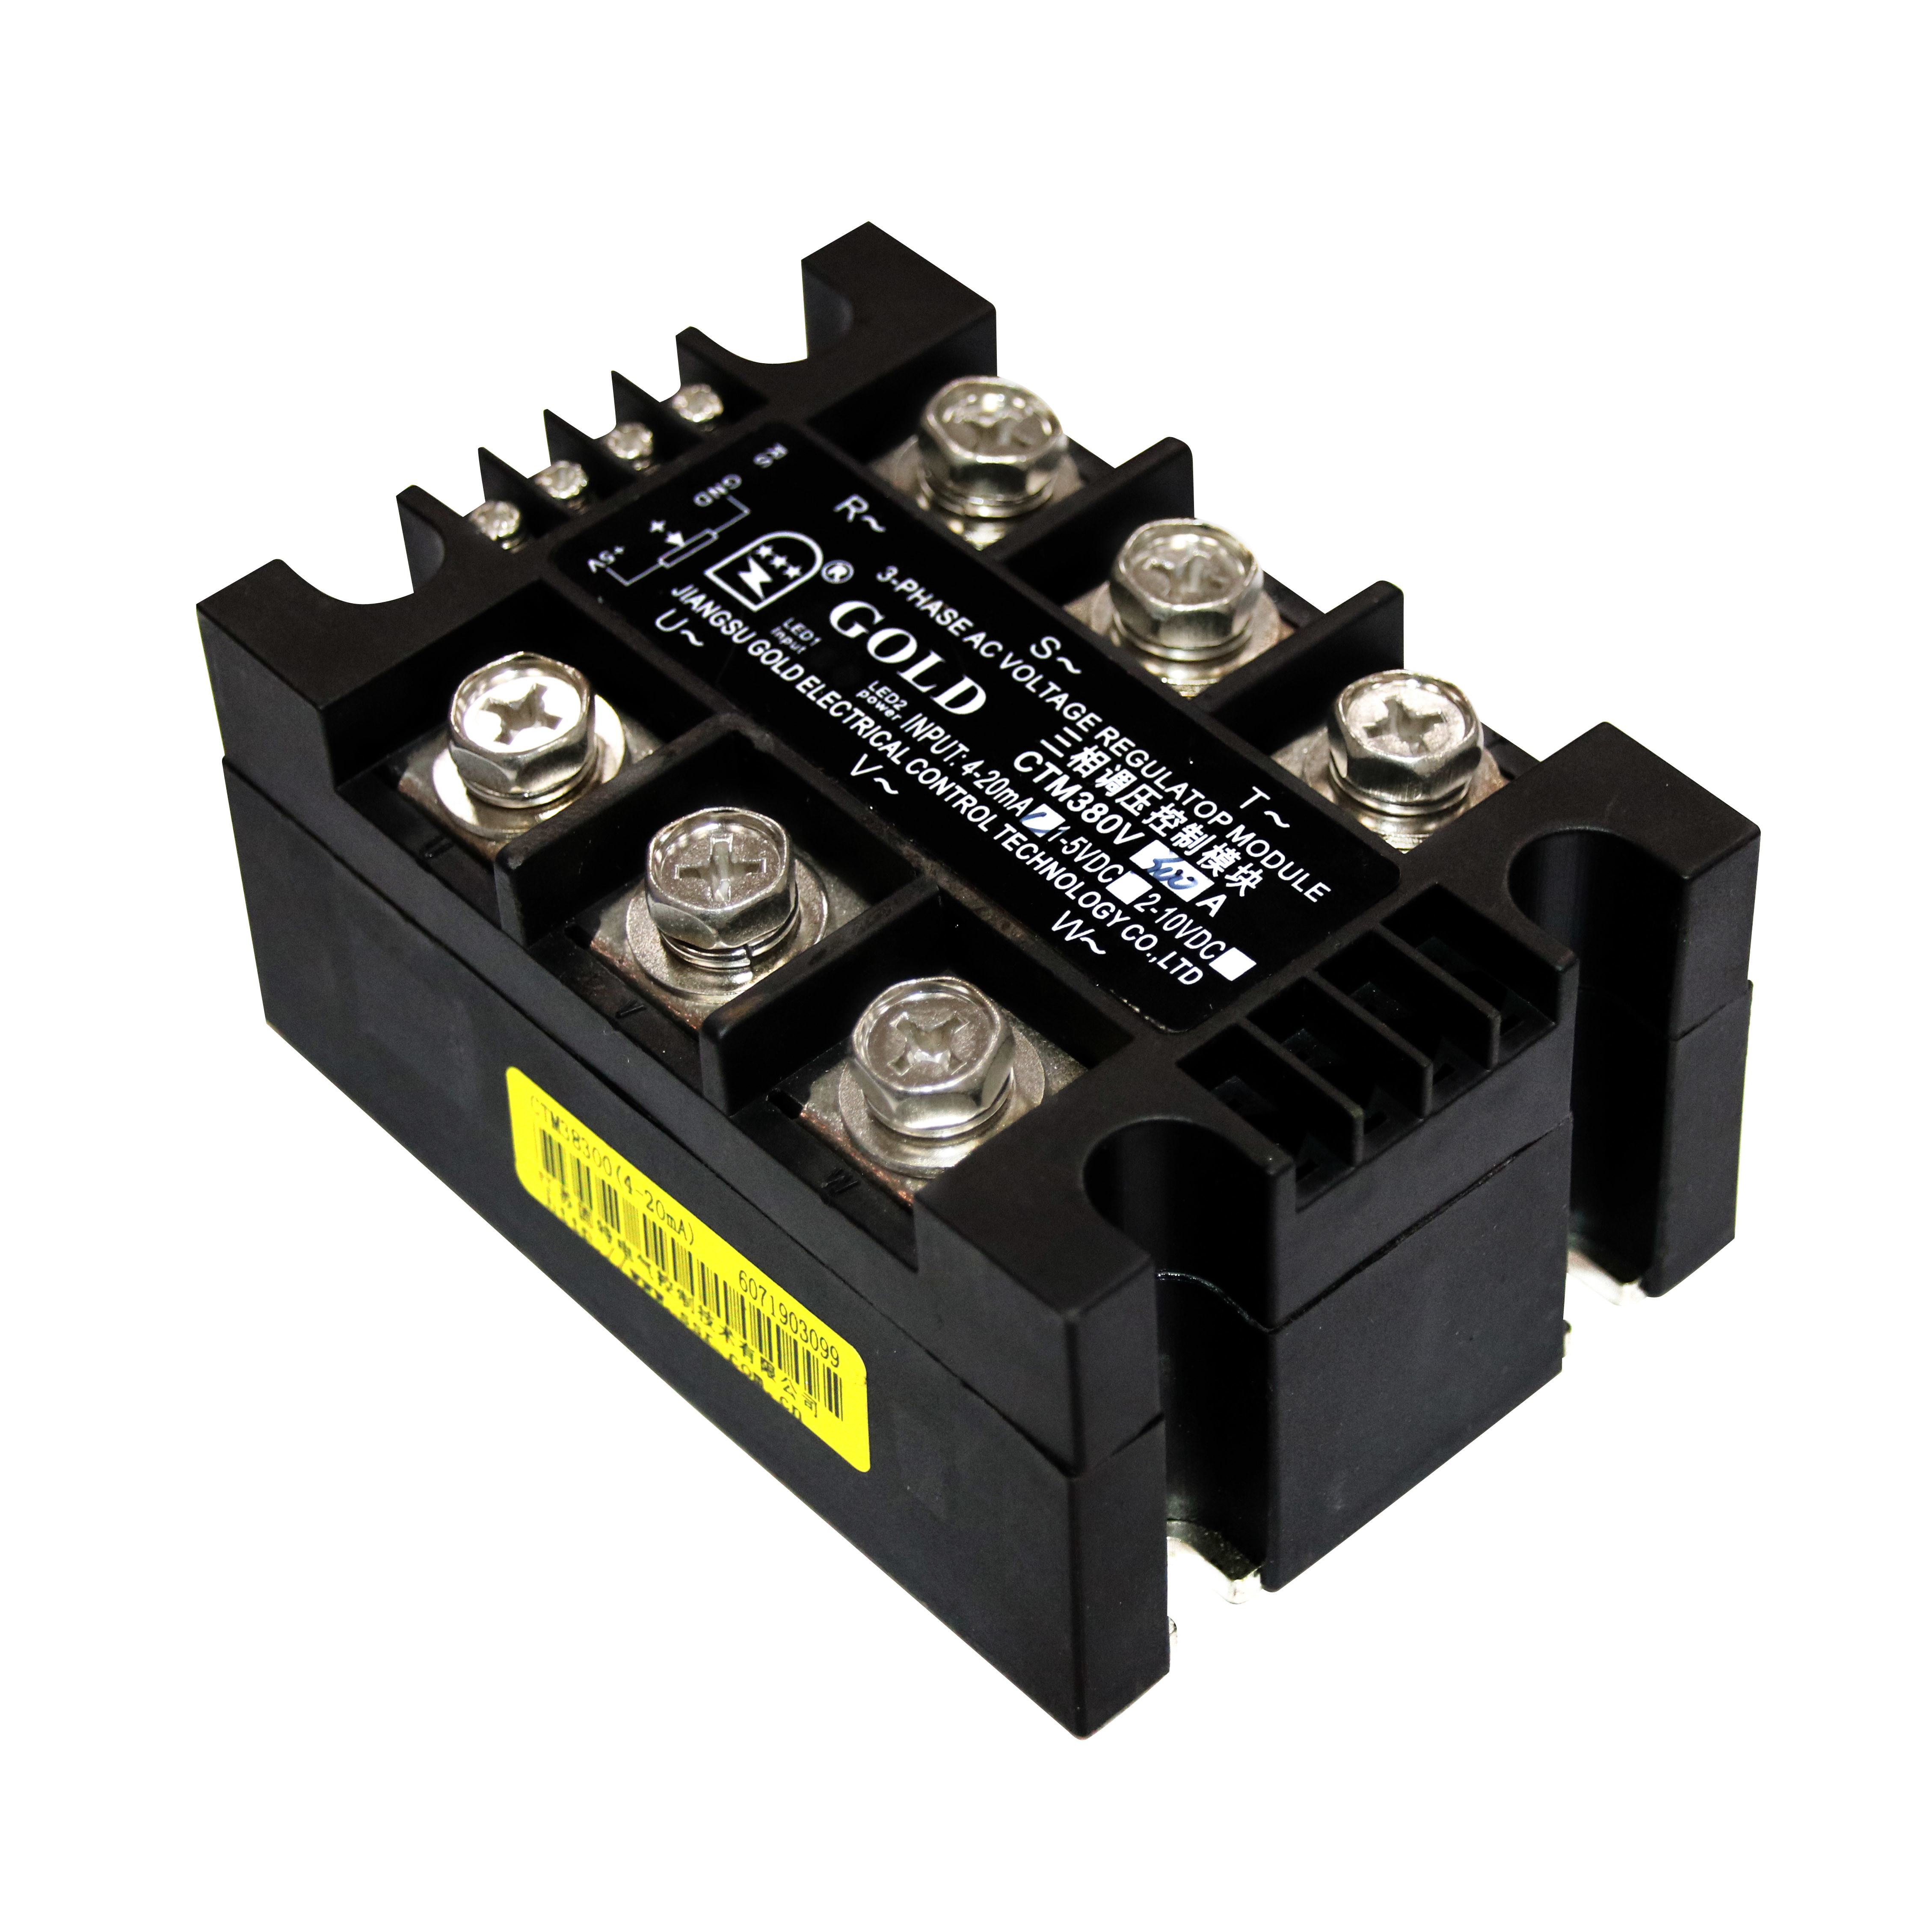 Buy cheap 120mm 150A Scr Speed Controller from wholesalers